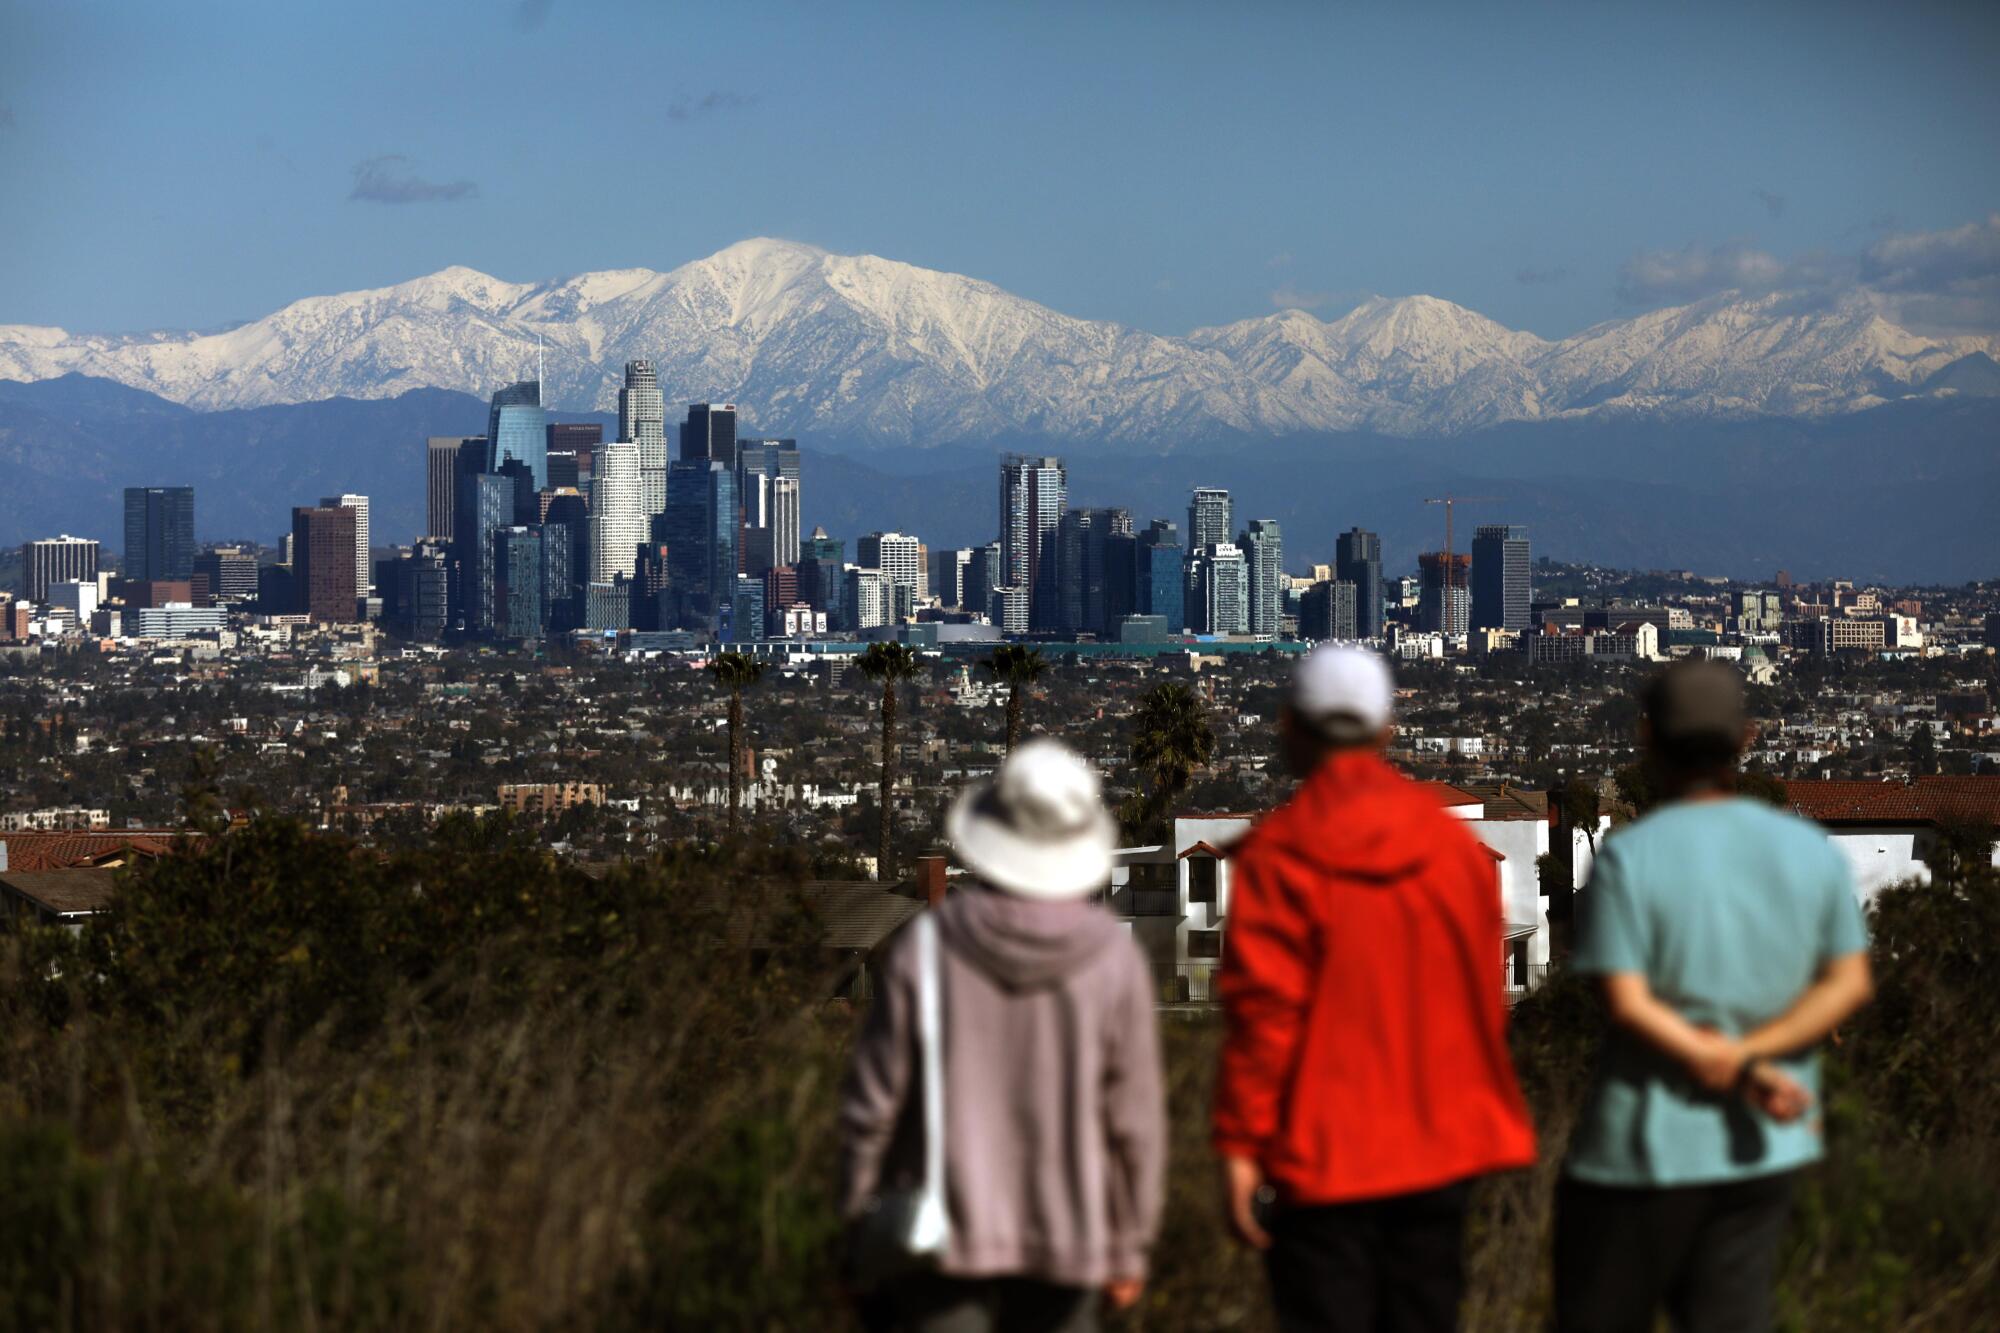 People look at the downtown L.A. skyline in front of snowy mountains.